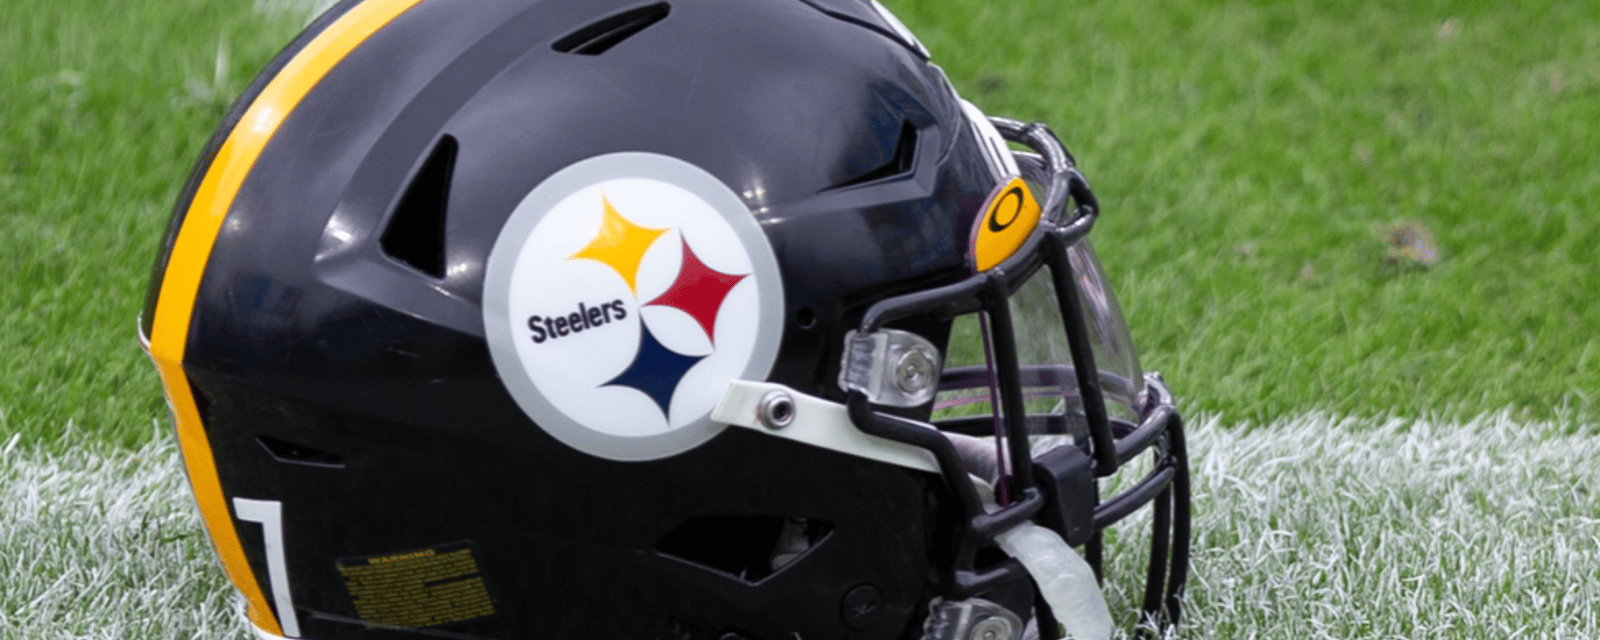 Steelers sign new WR weapon for Russell Wilson 